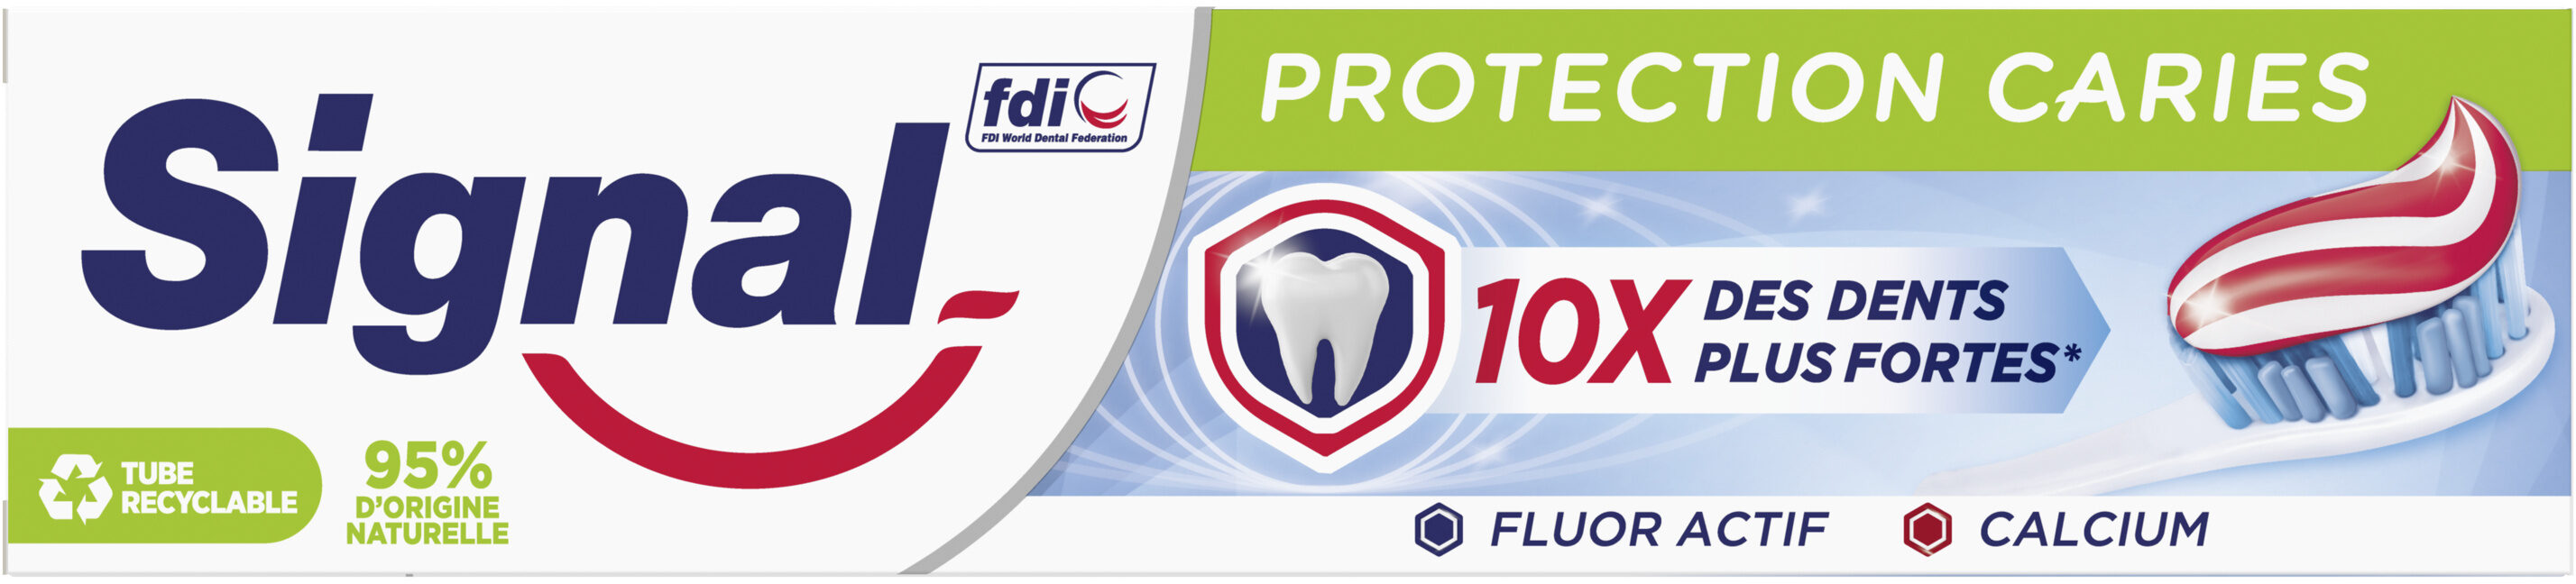 Signal Dentifrice Protection Caries 125ml - Produkt - fr